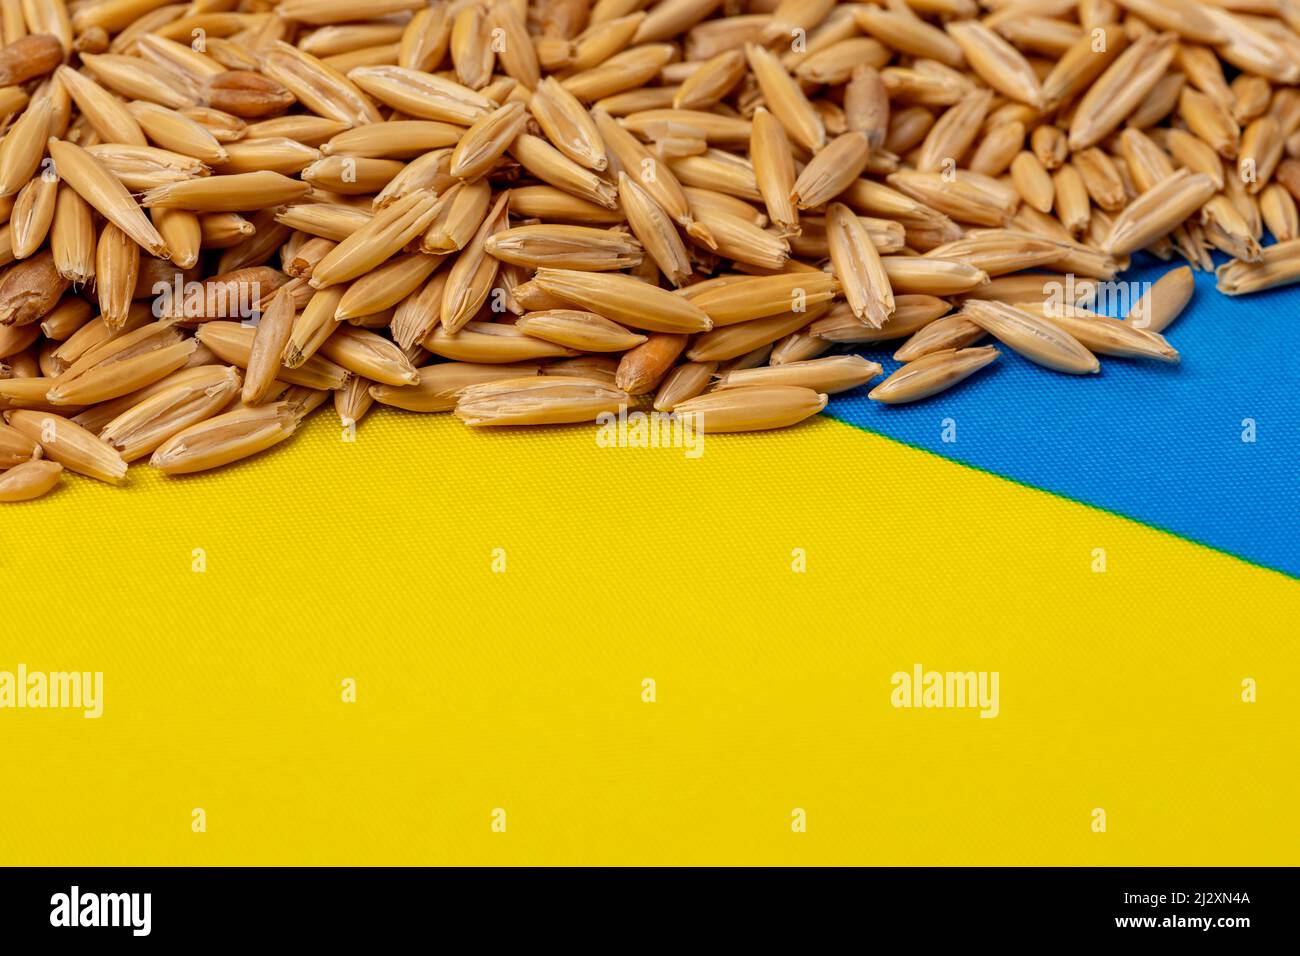 Ukraine flag and oats. Cereal grain exports, production and farming concept. Stock Photo